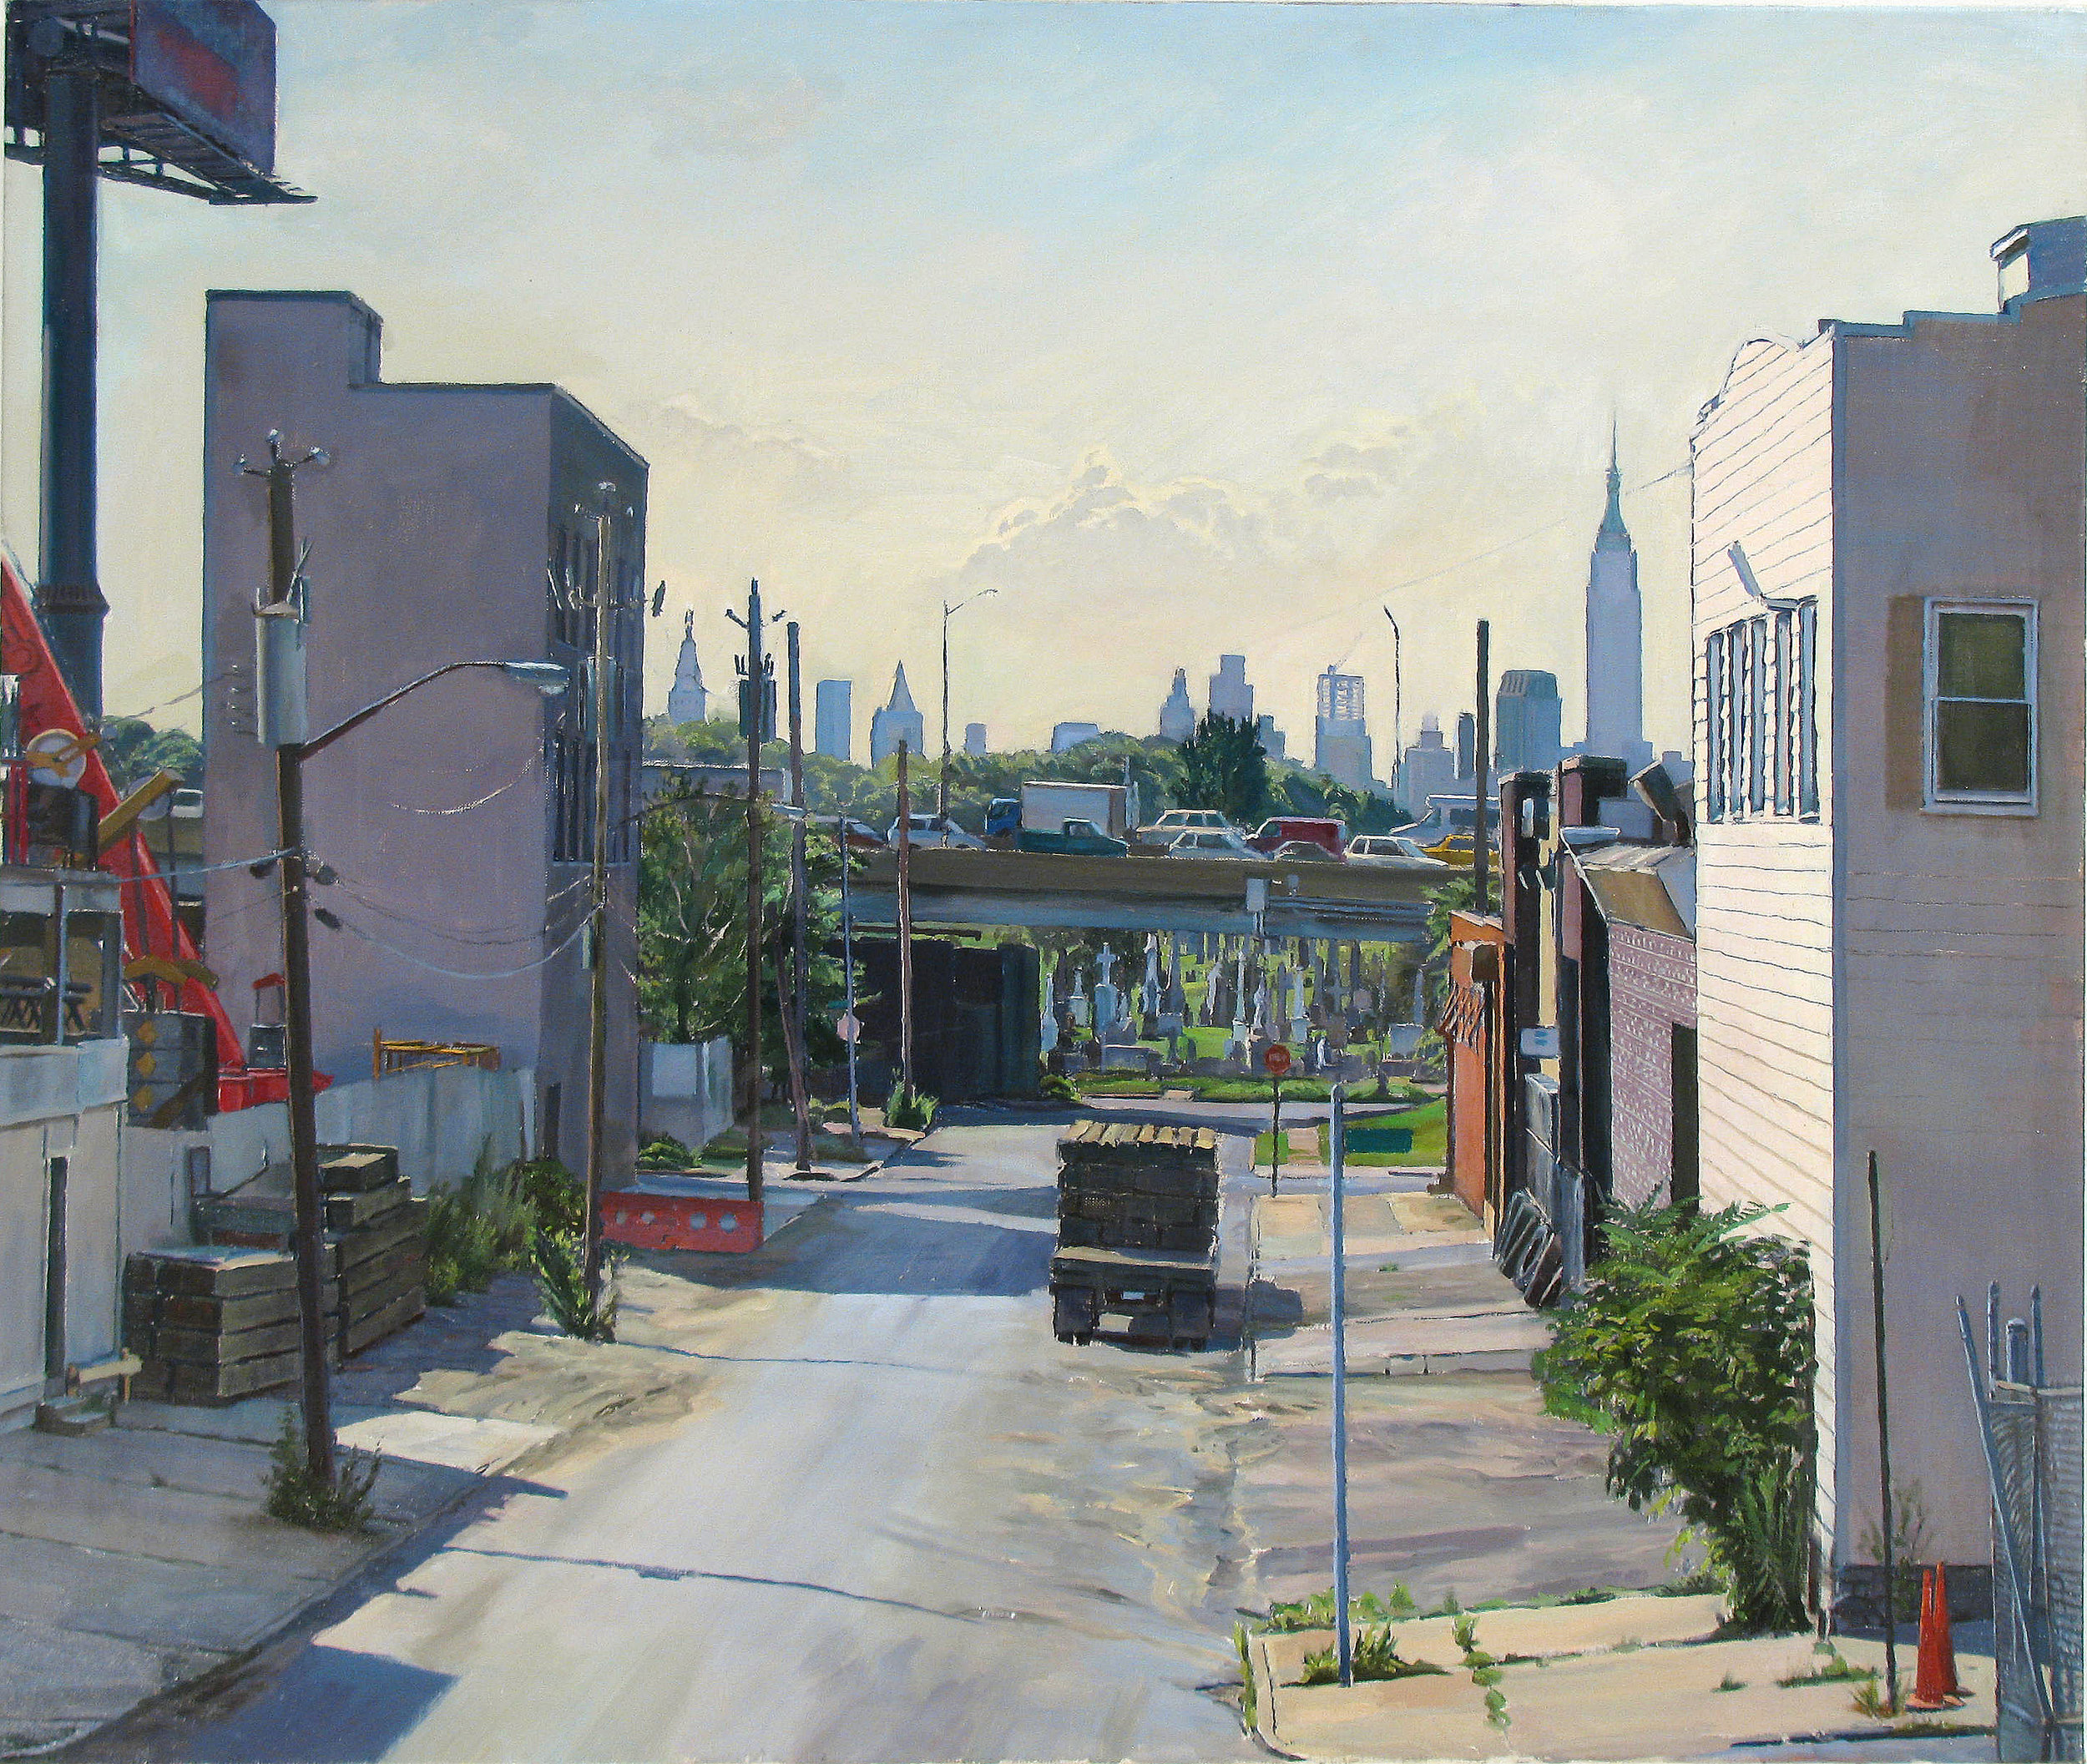  END OF ROAD oil on linen 28 x 33” 2010 